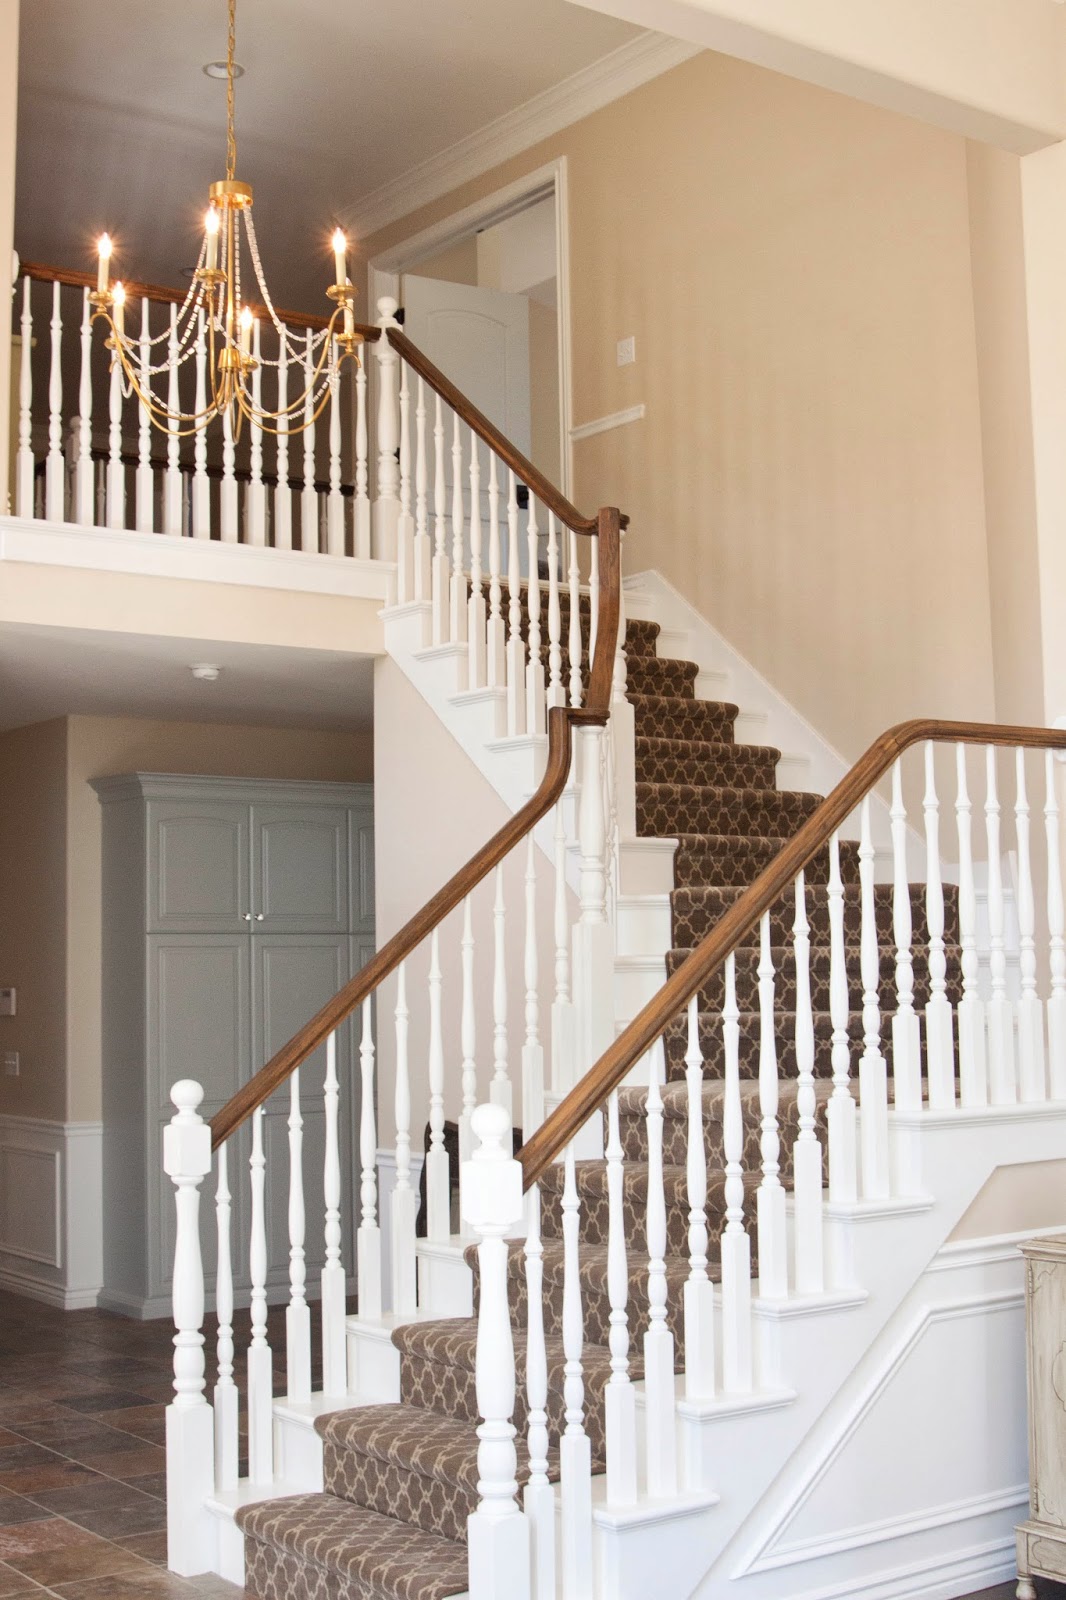 42 HQ Pictures How To Clean Wood Banisters - How To Gel Stain (ugly) Oak Banisters.